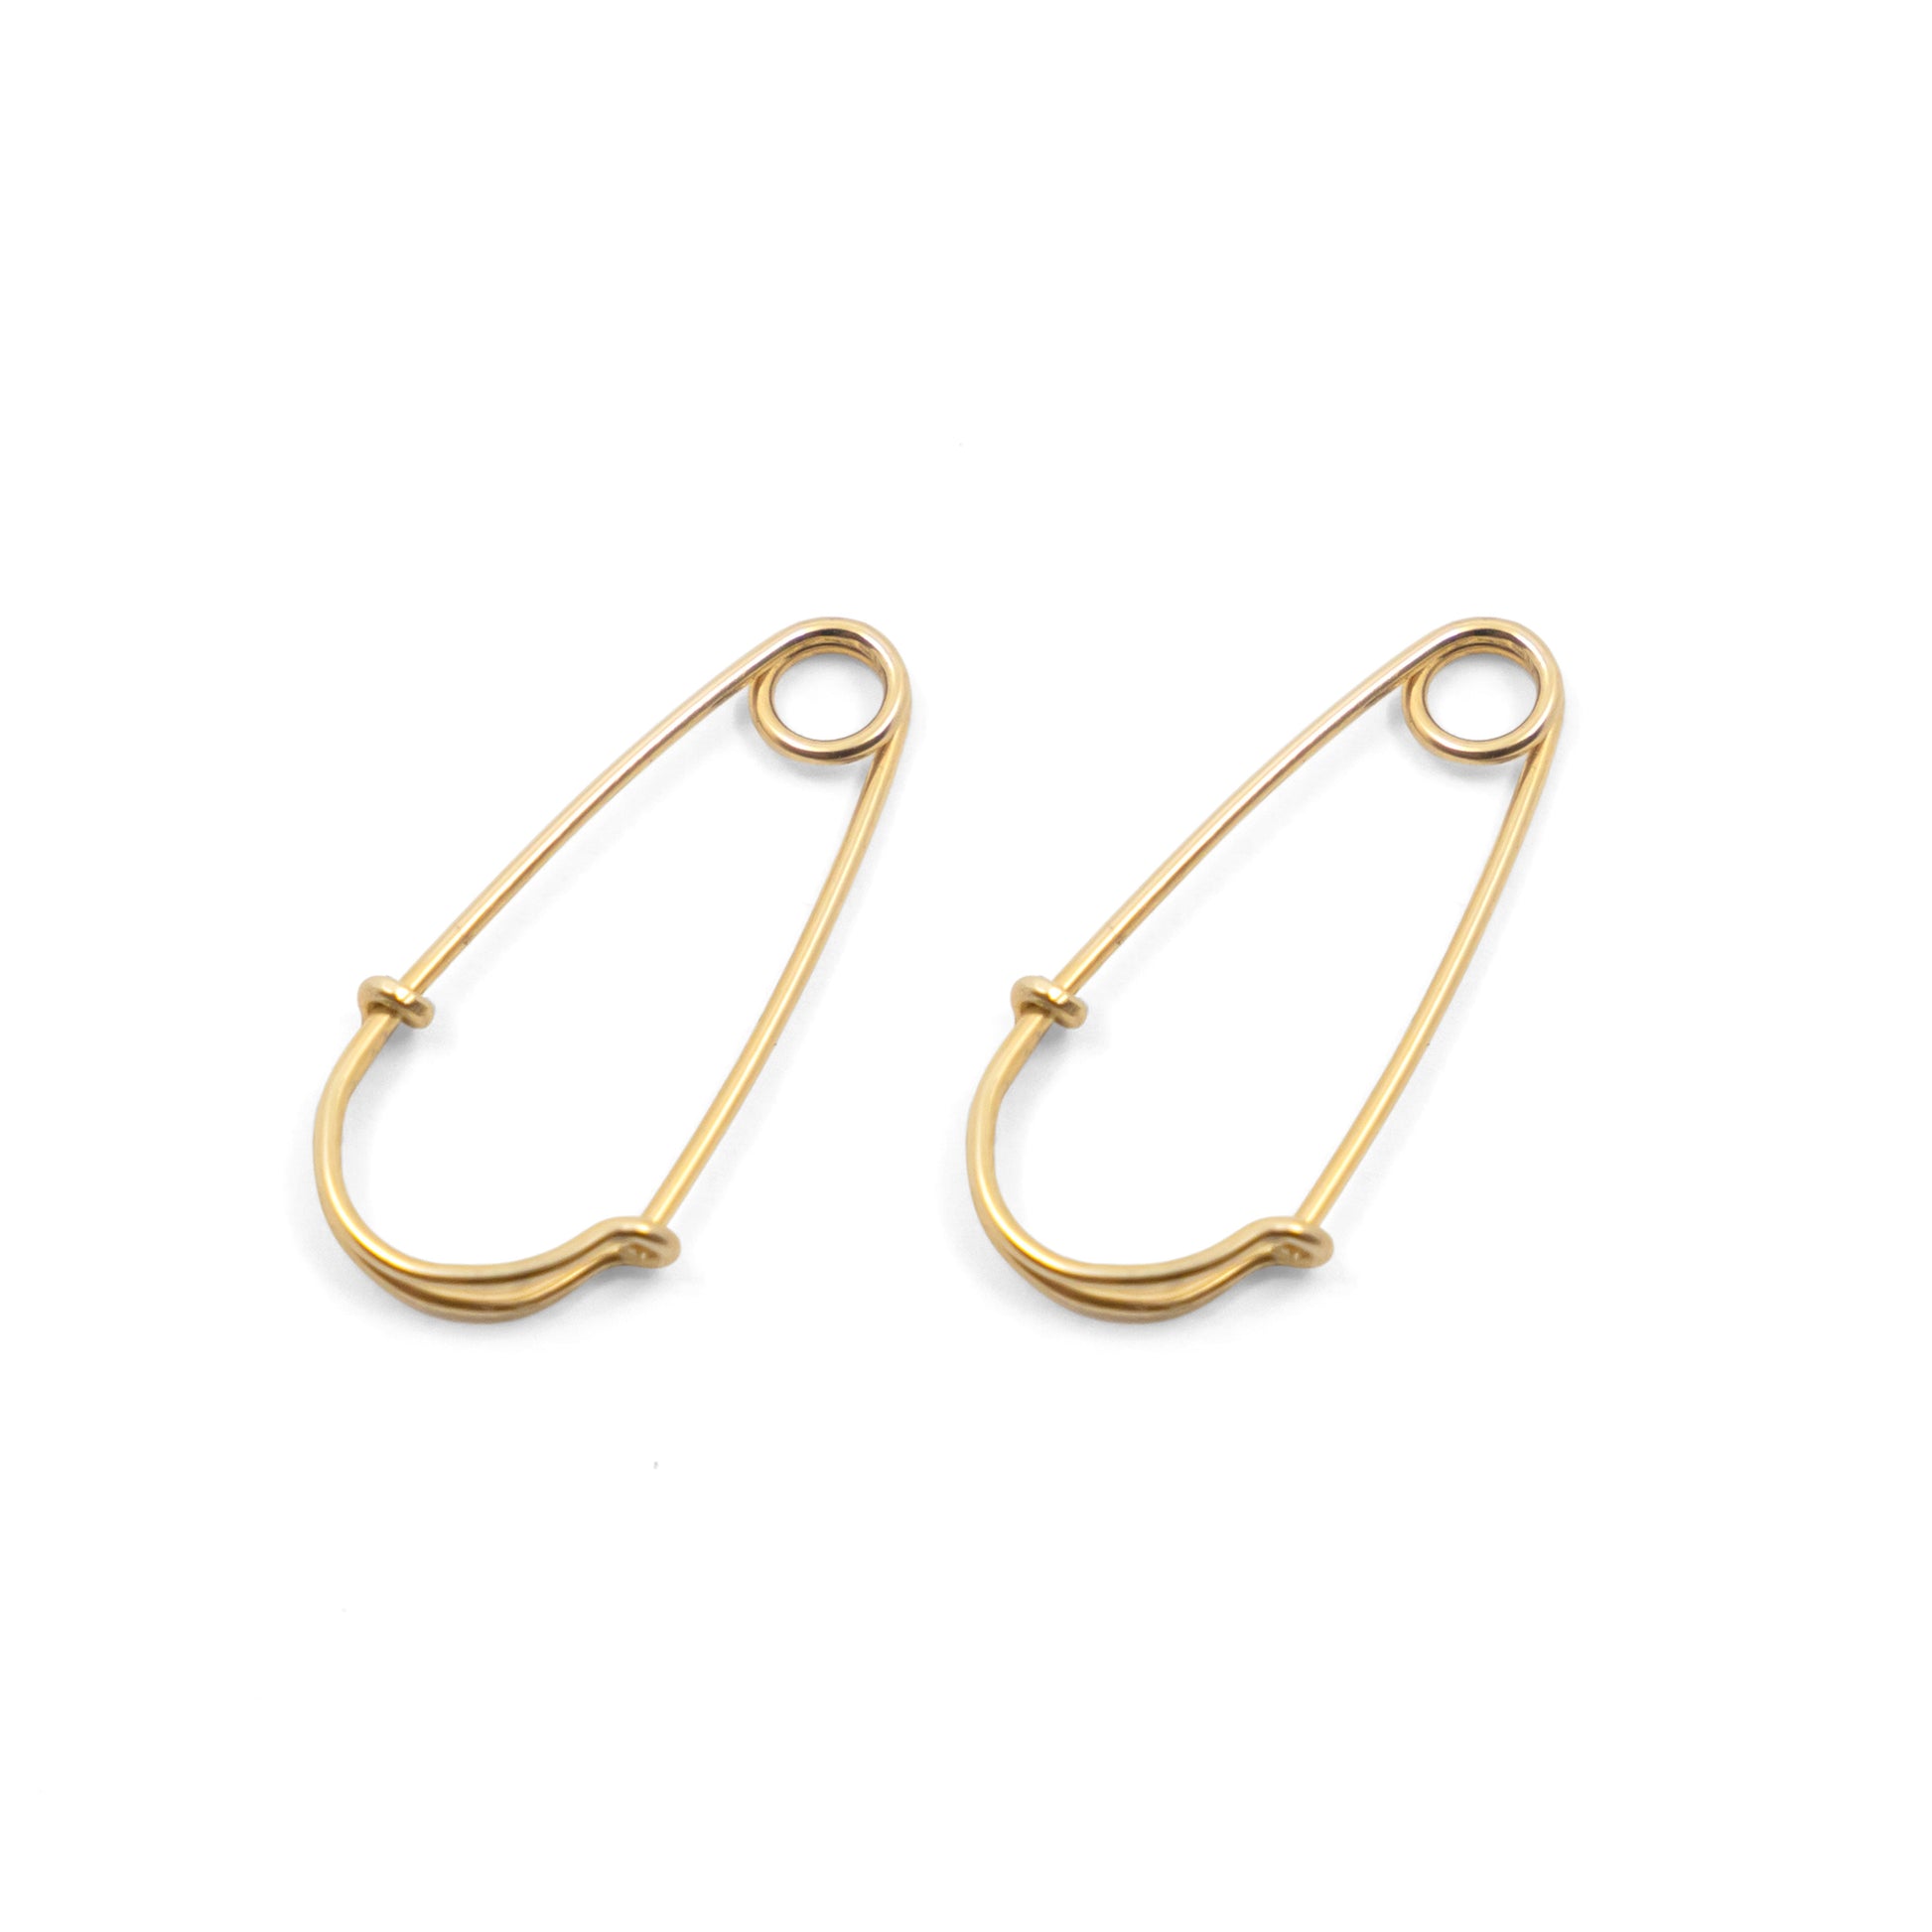 Wire Safety Pin Earring (Coiled) - Sterling Silver & Gold Filled - Futaba Hayashi